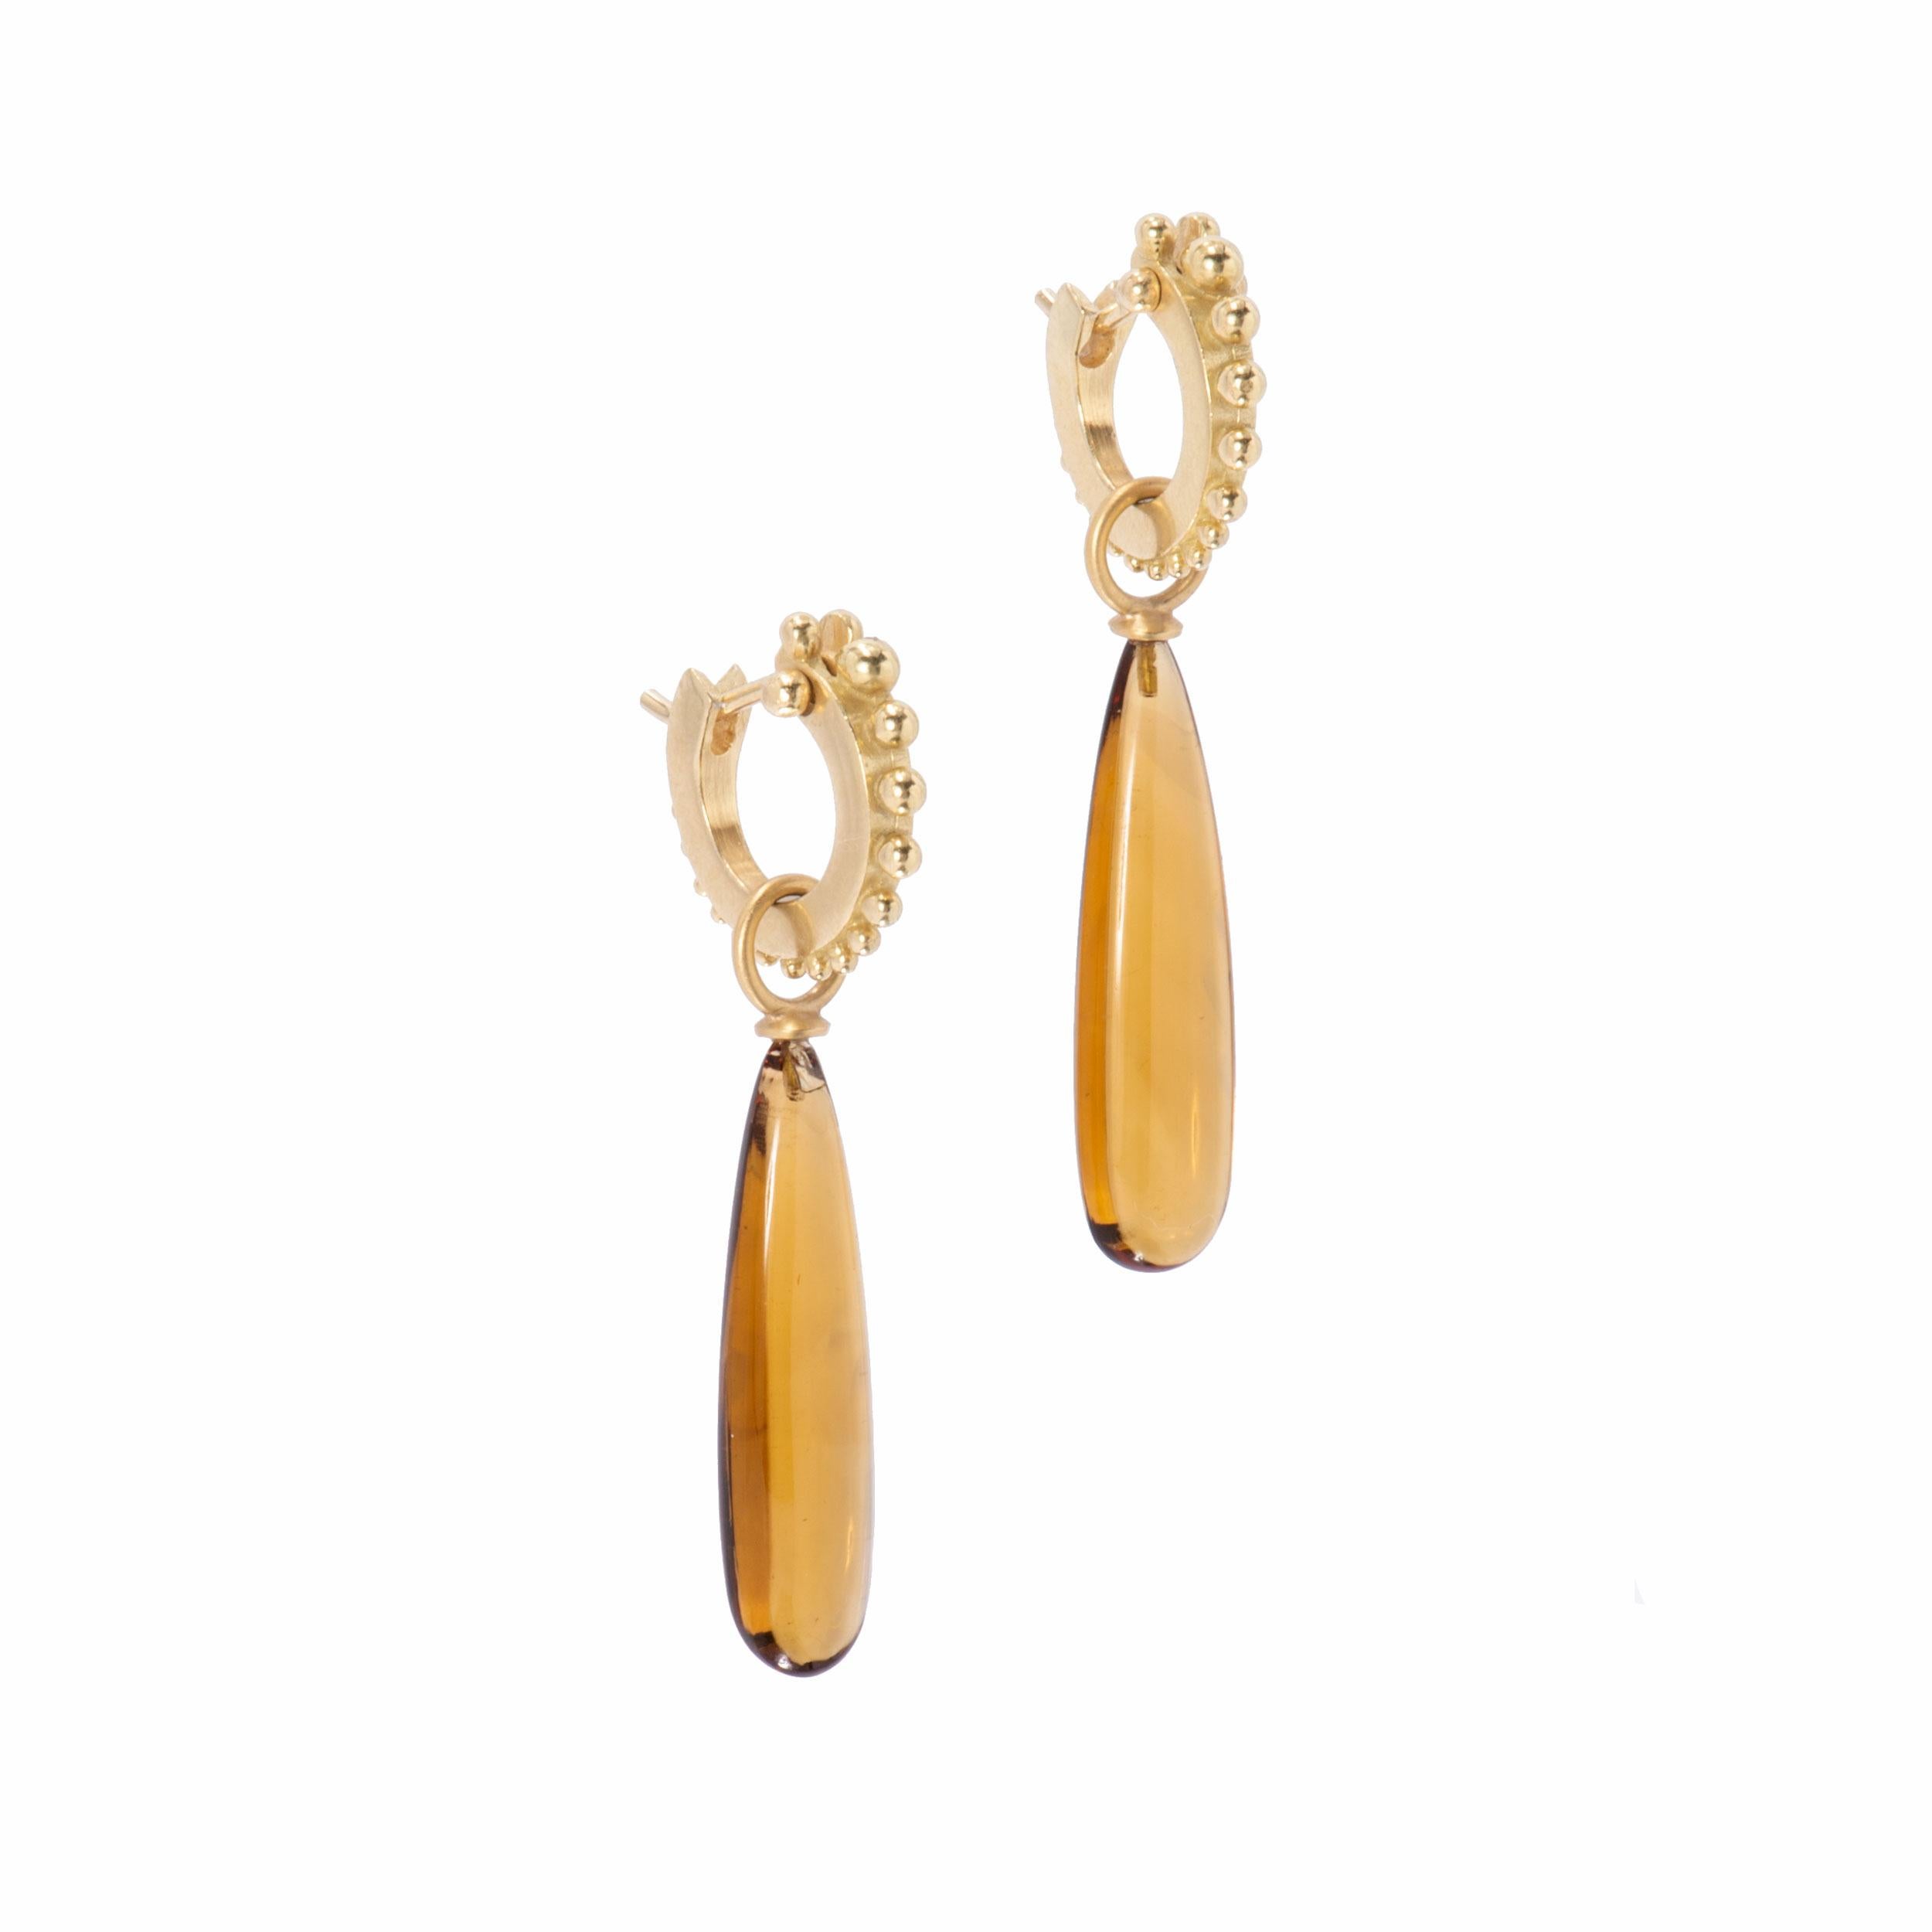 Contemporary Congolese Citrine Wand Drop Earrings in 18 Karat Gold